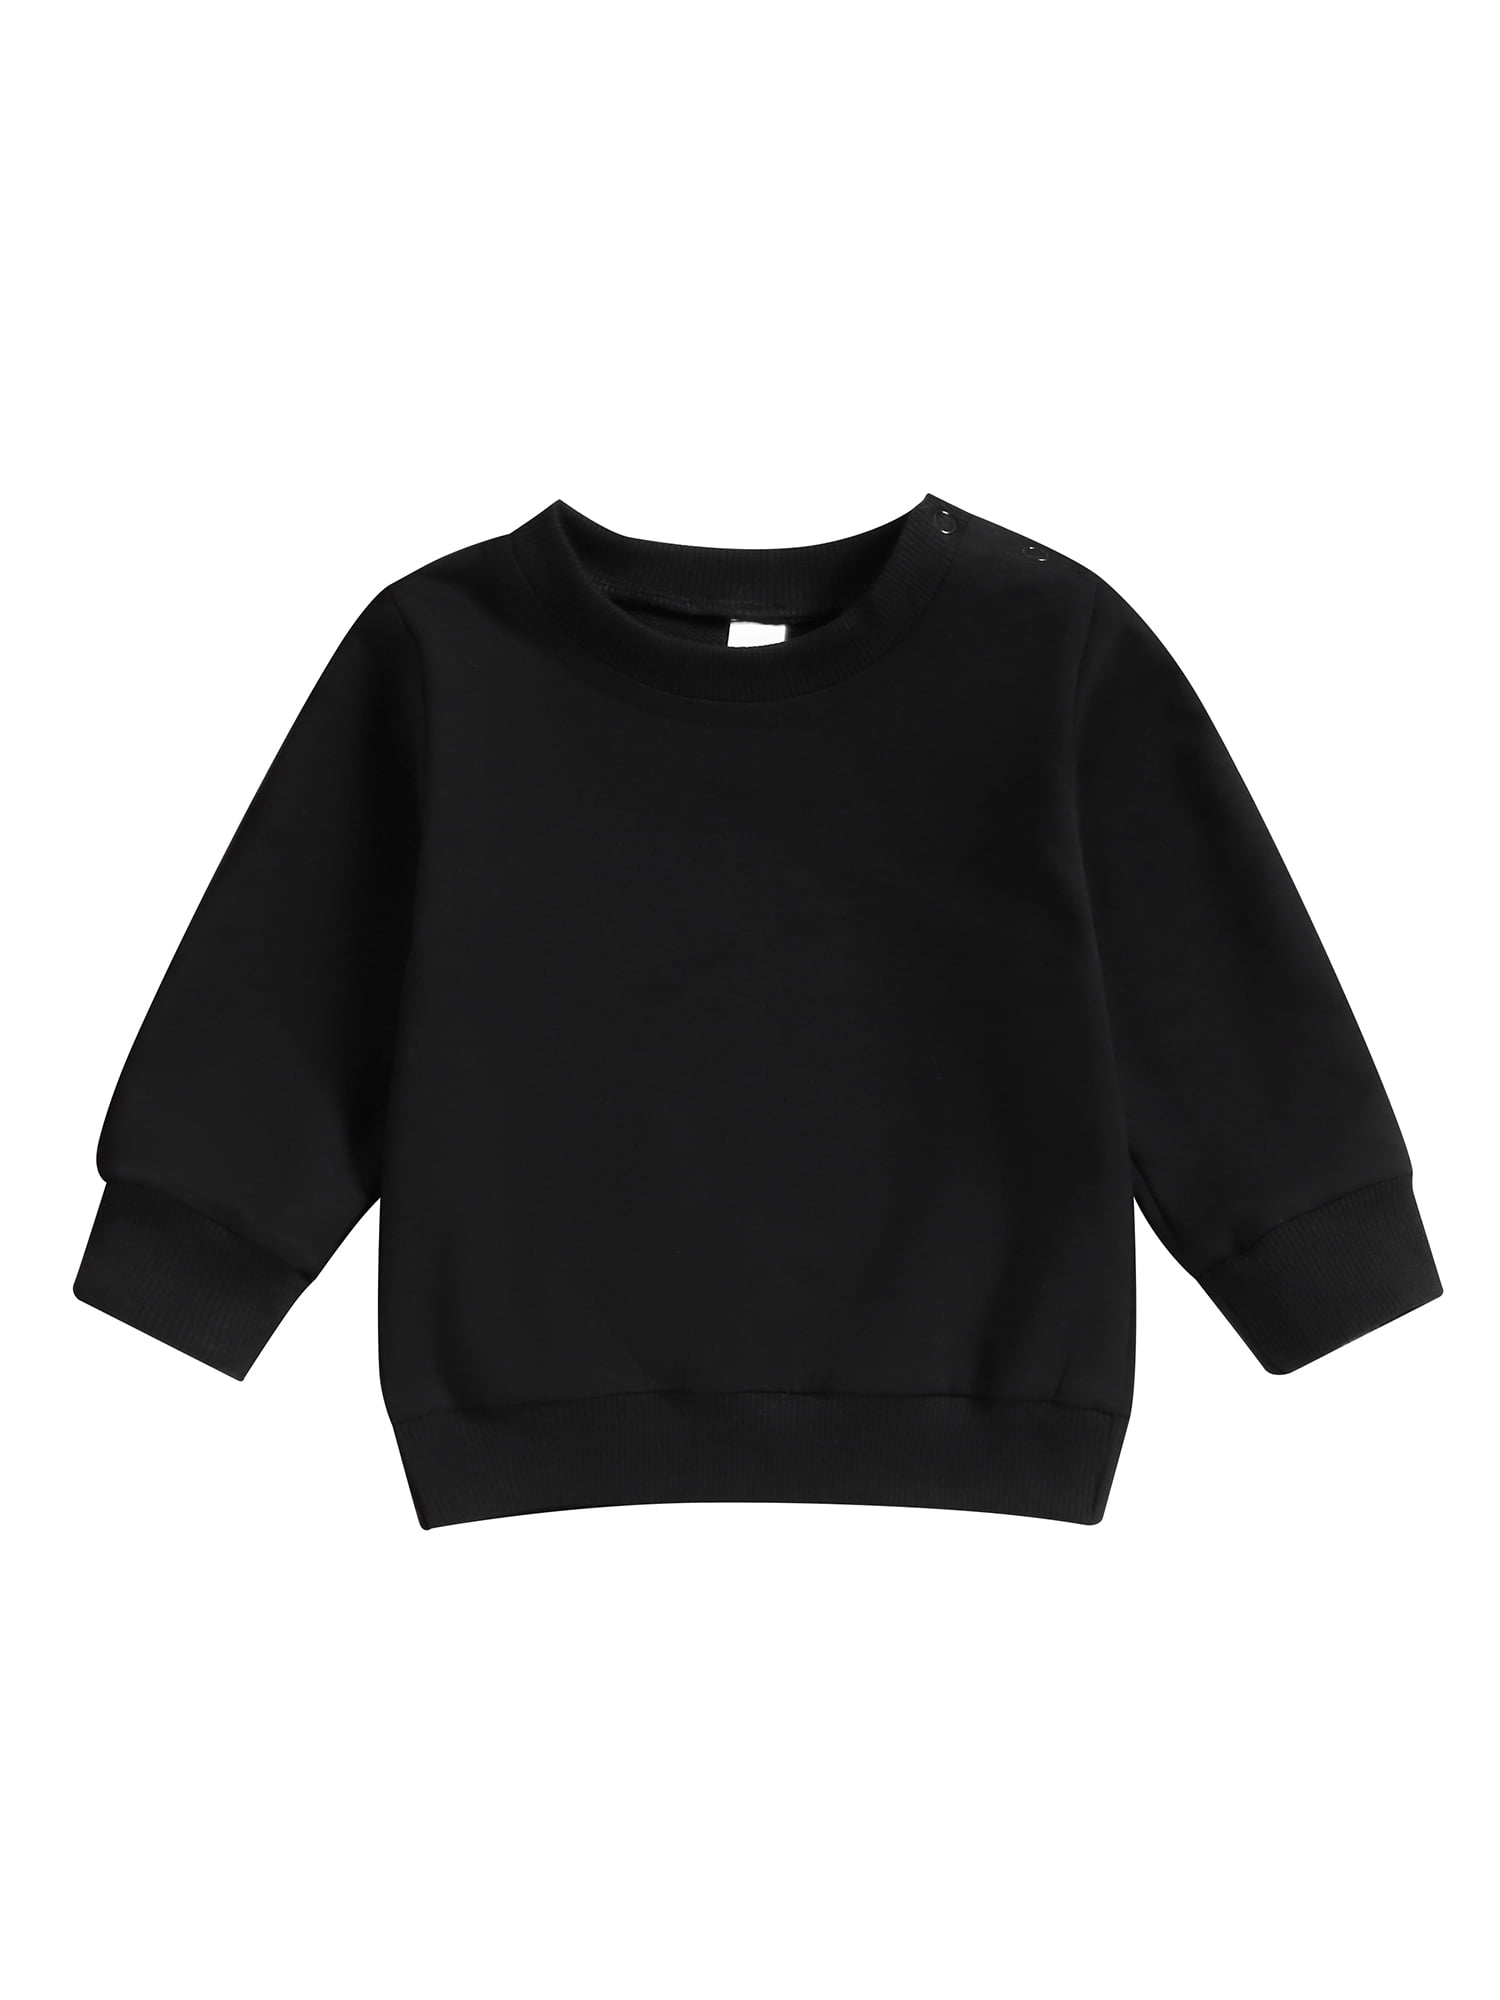 Pullover Months Fall Toddler Crewneck Baby Clothes Infant Sweatshirt 12-18 Sleeve Color Long Qtinghua Tops Black Solid Boy